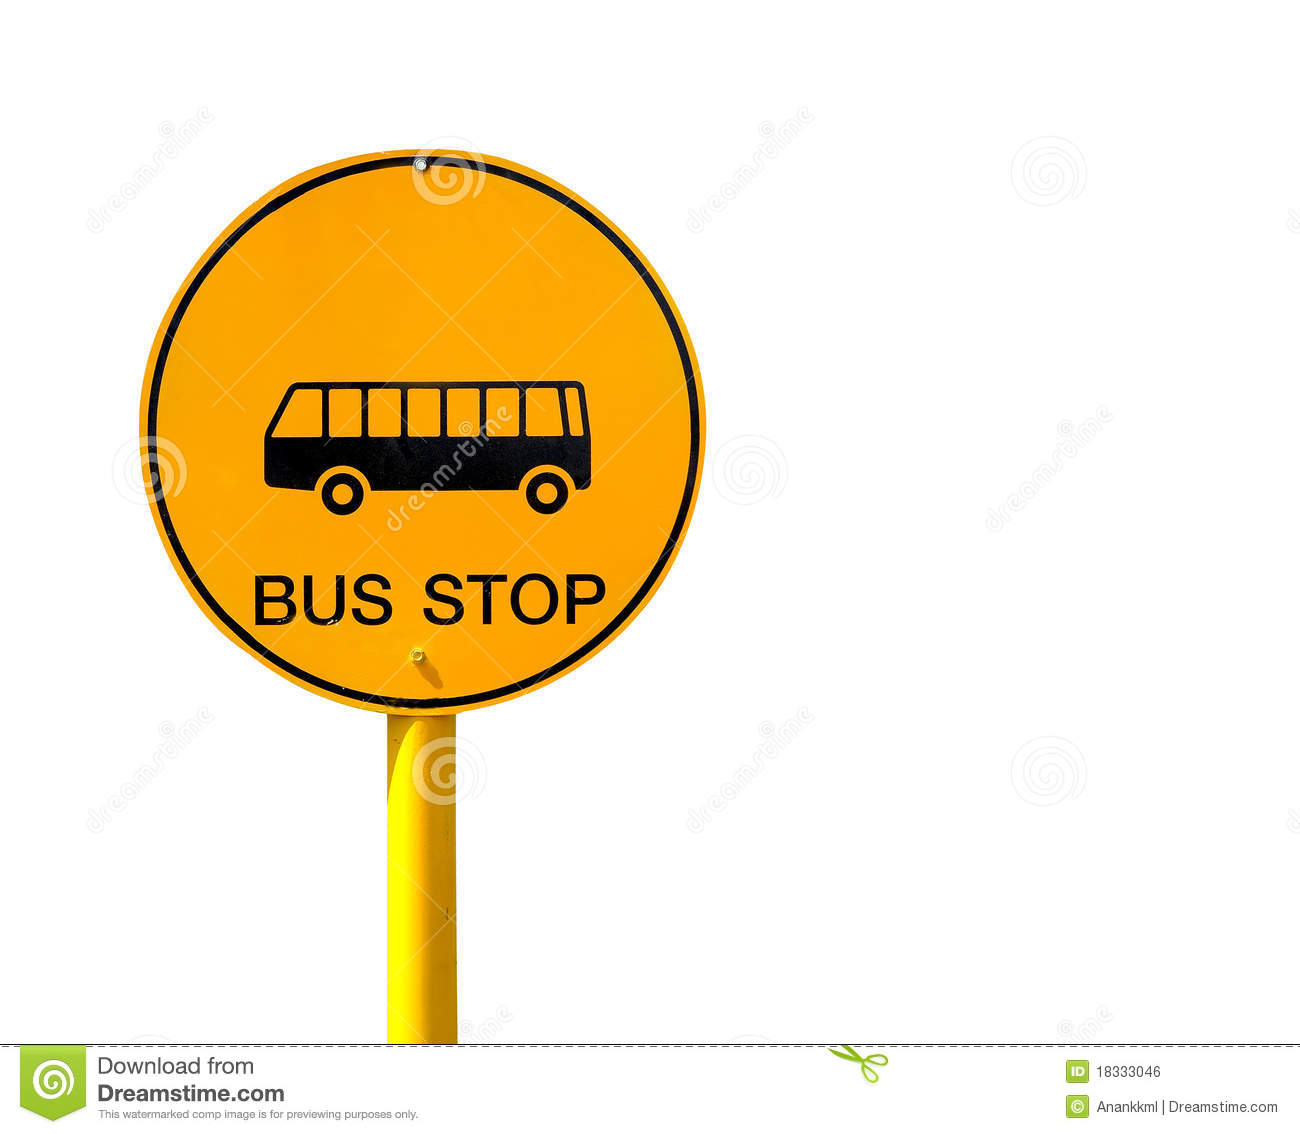 Bus Stop Sign Royalty Free Stock Image   Image  18333046